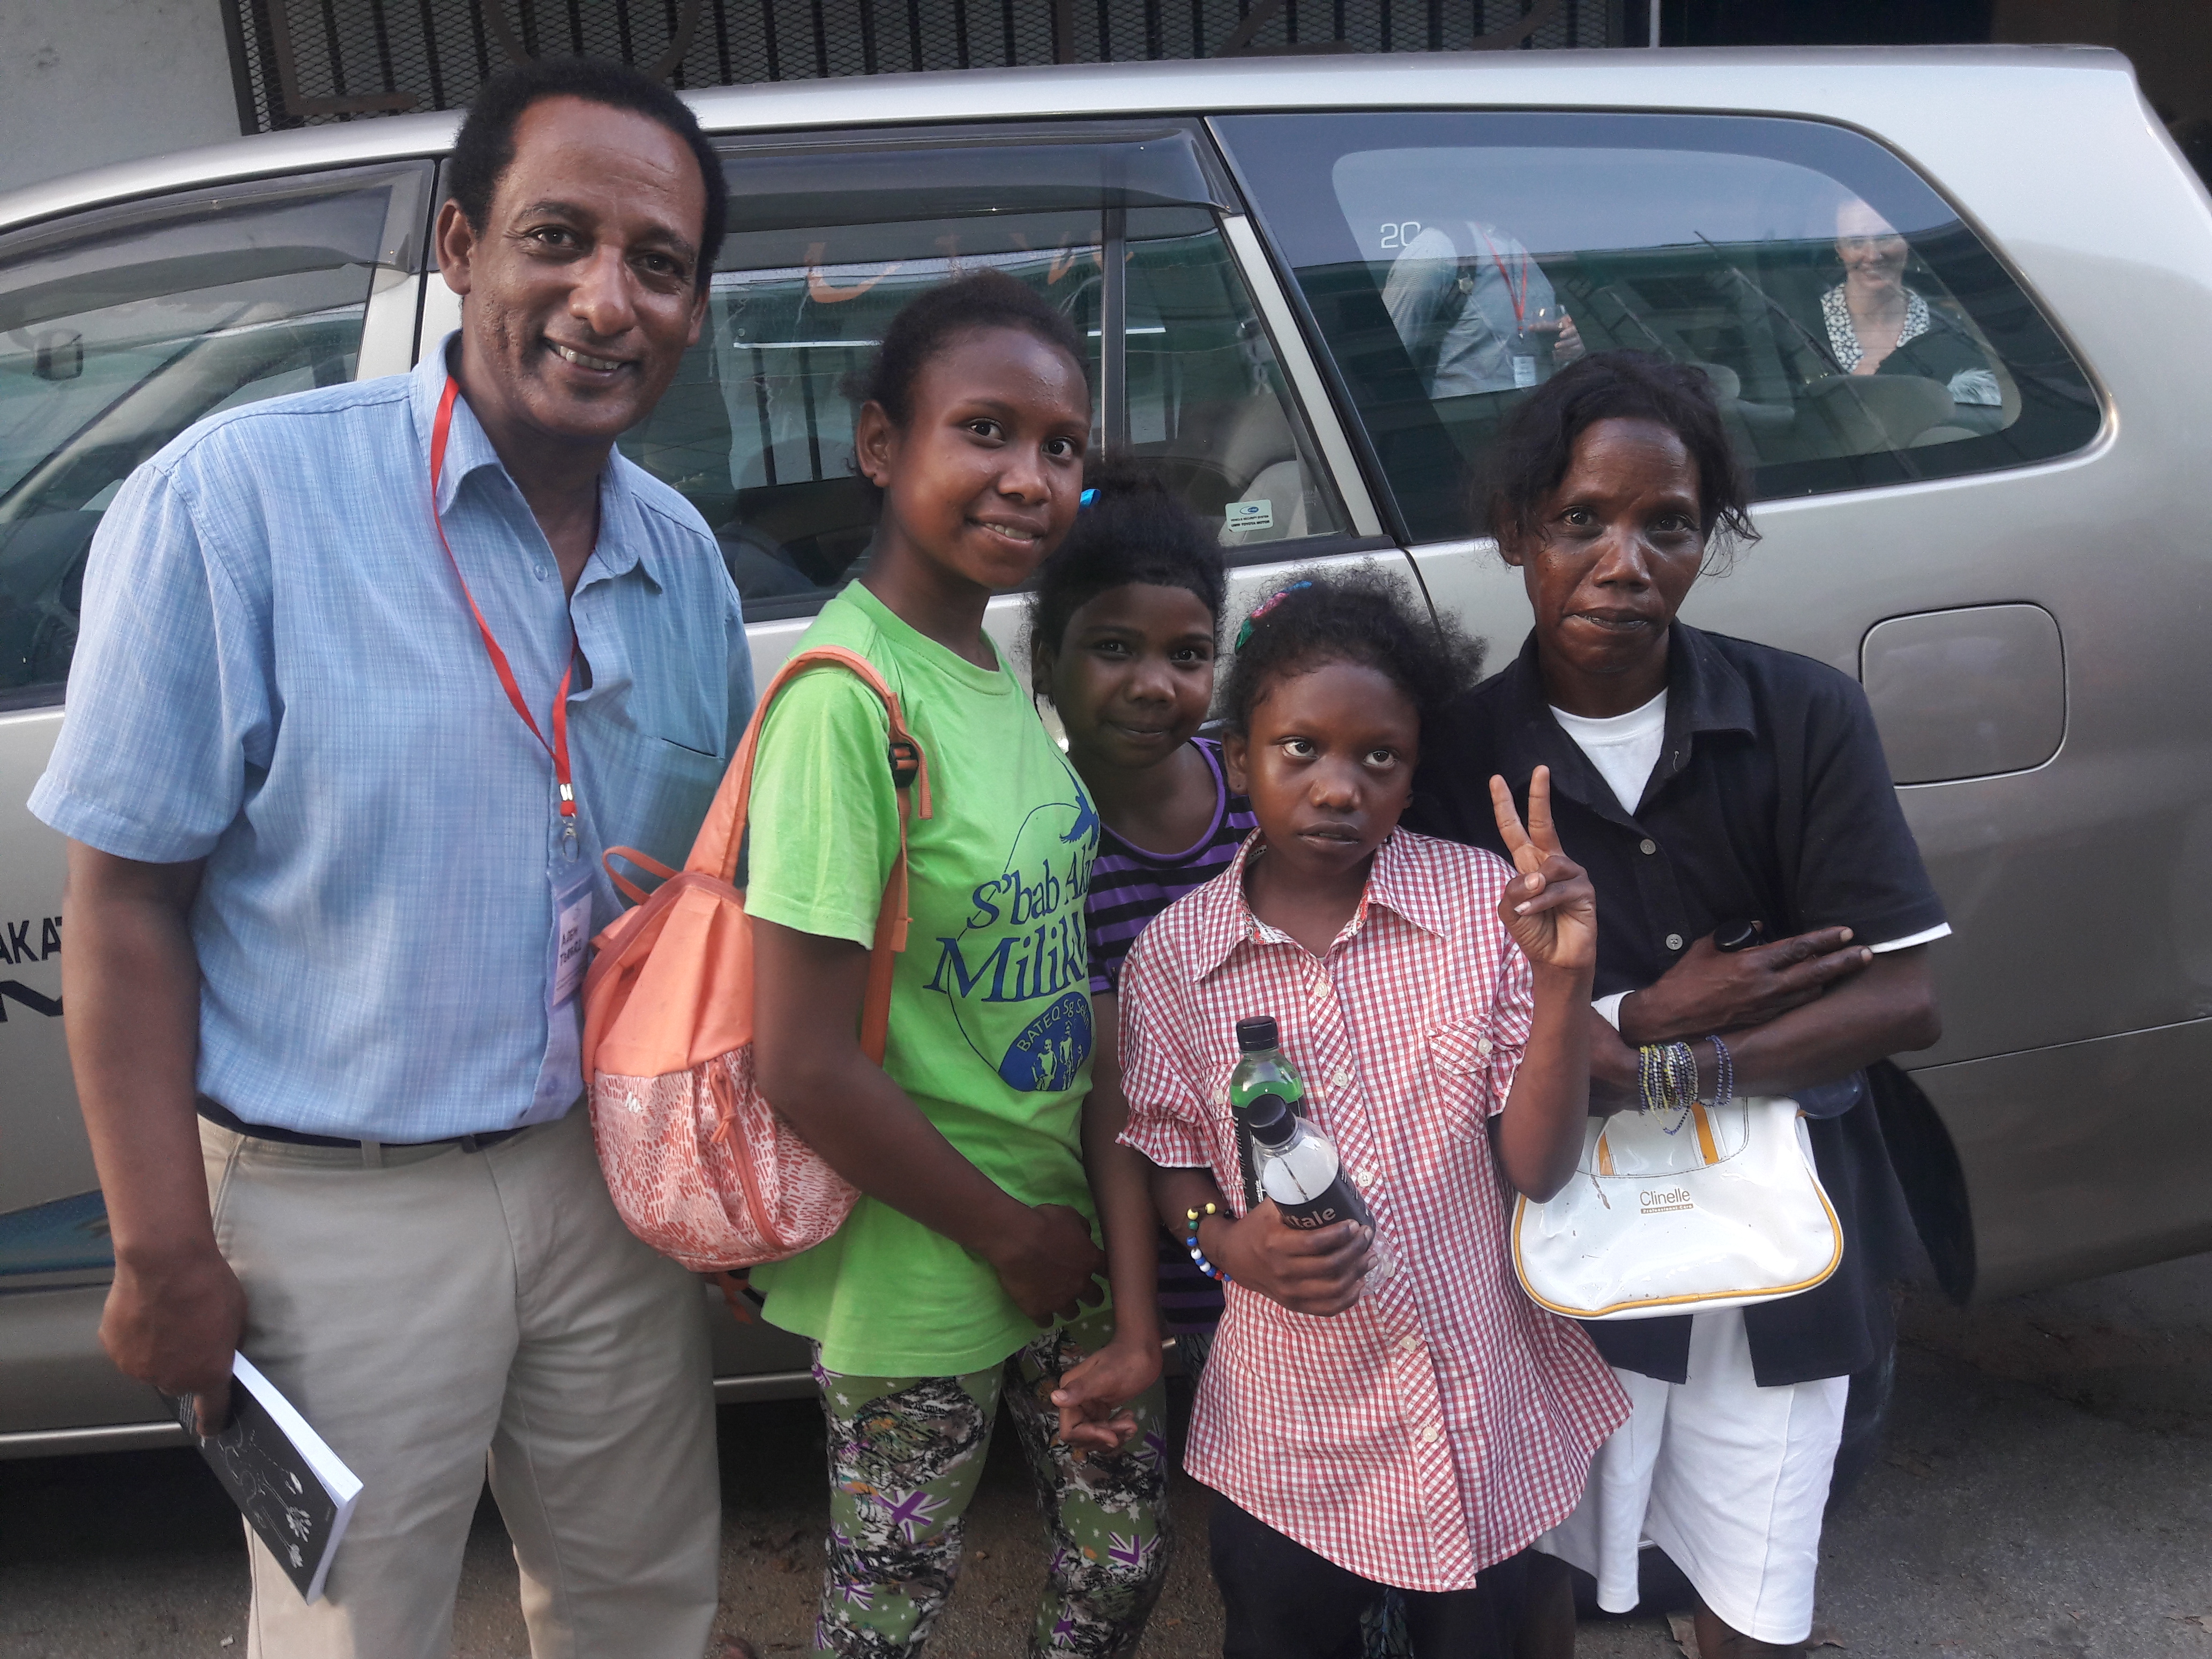 Teferi poses with a woman and three girls beside a car.